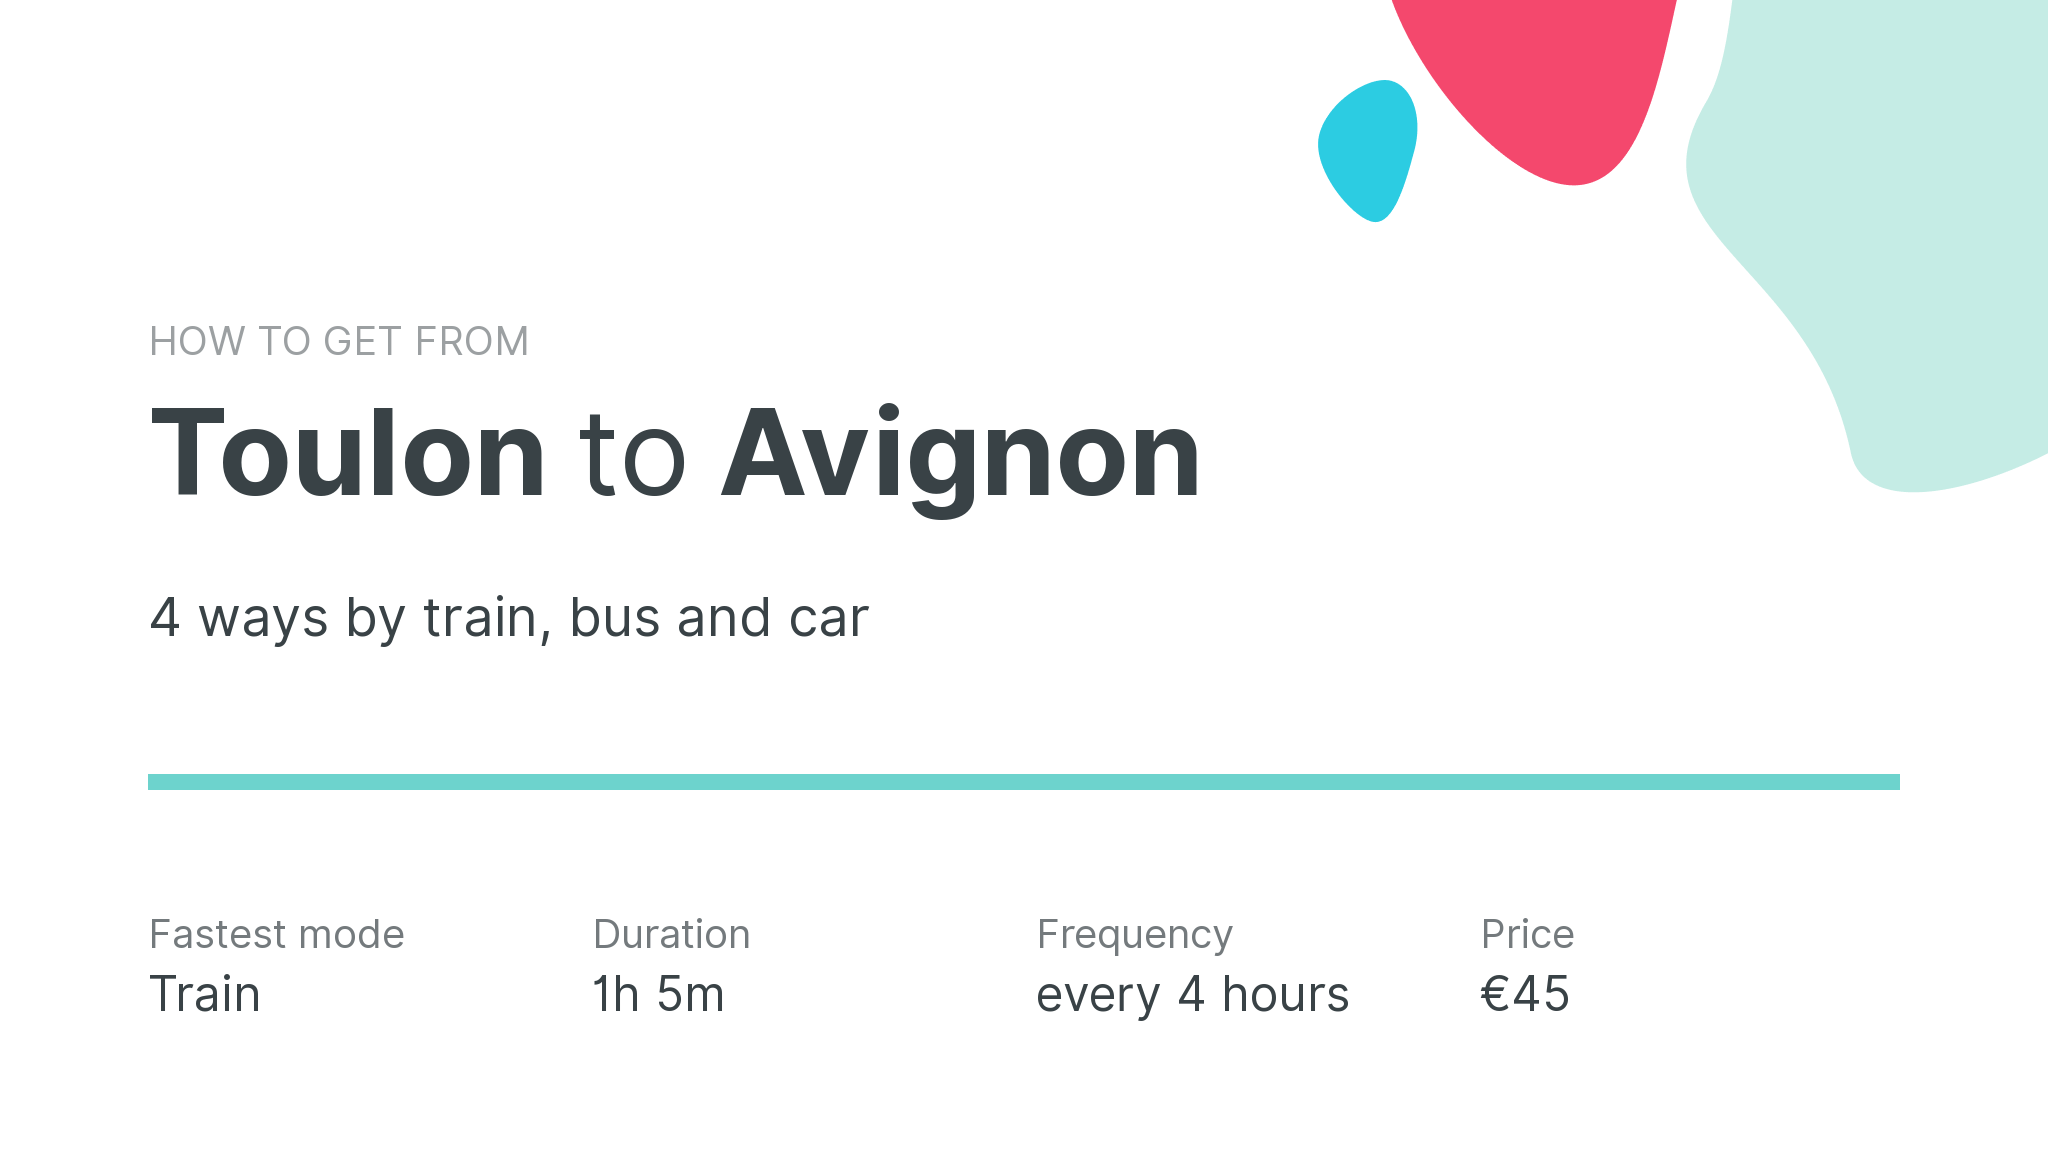 How do I get from Toulon to Avignon